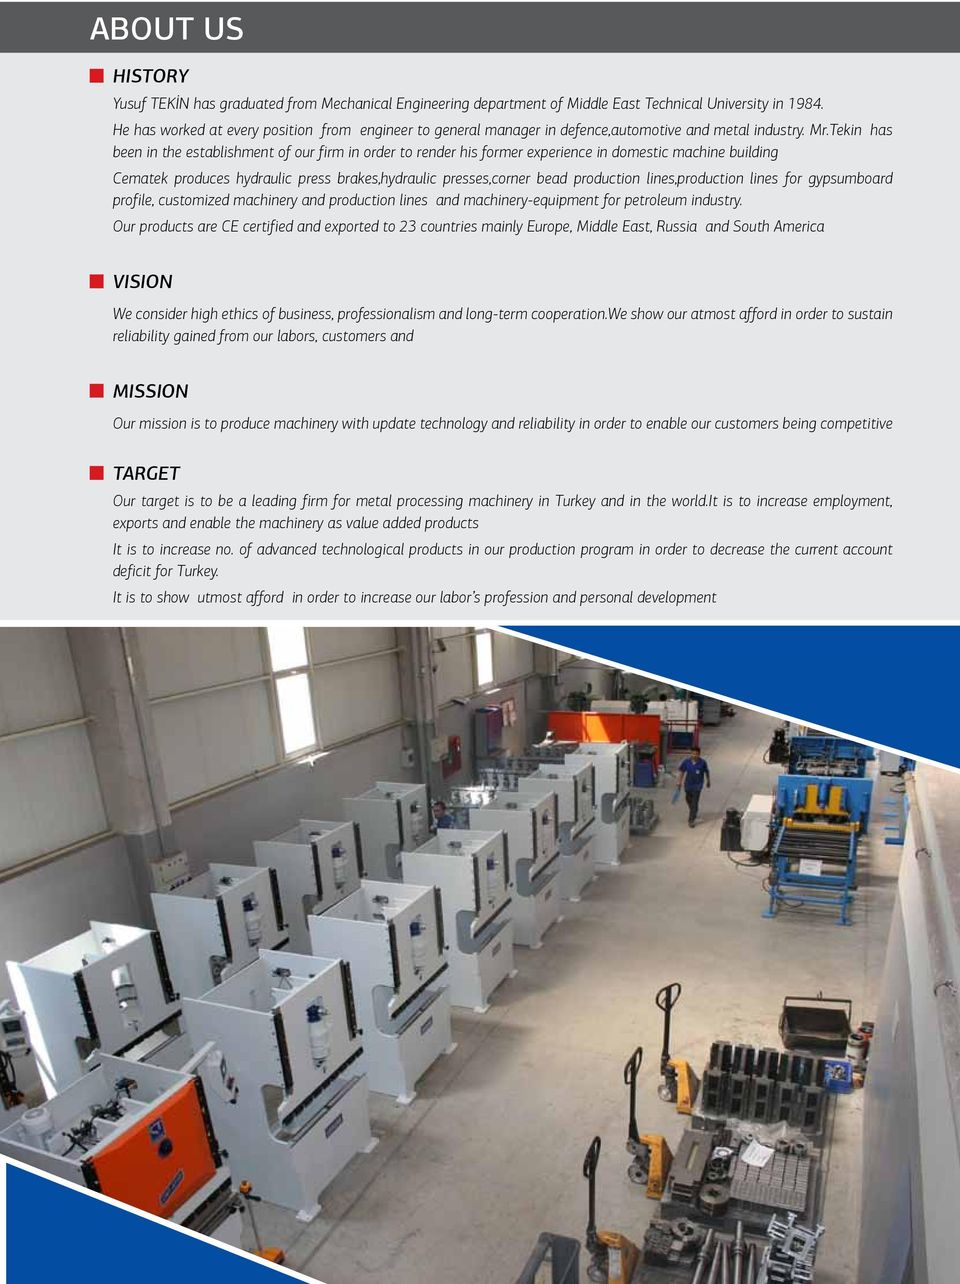 Tekin has been in the establishment of our firm in order to render his former experience in domestic machine building ematek produces hydraulic press brakes,hydraulic presses,corner bead production